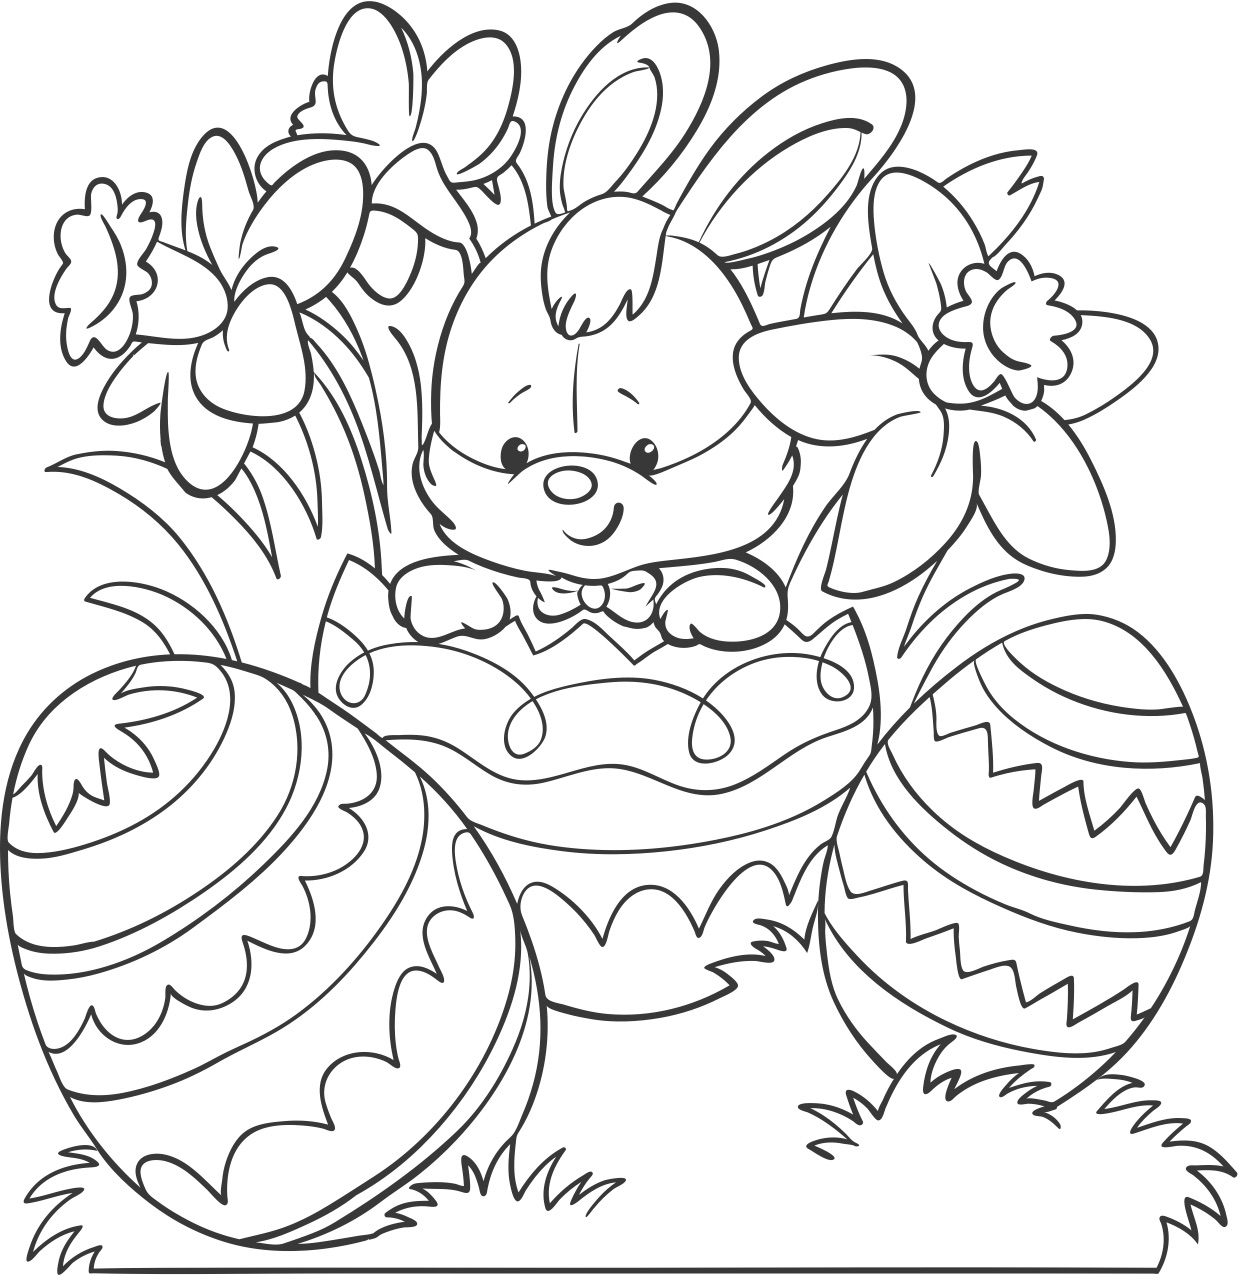 pin-on-example-picture-into-coloring-pages